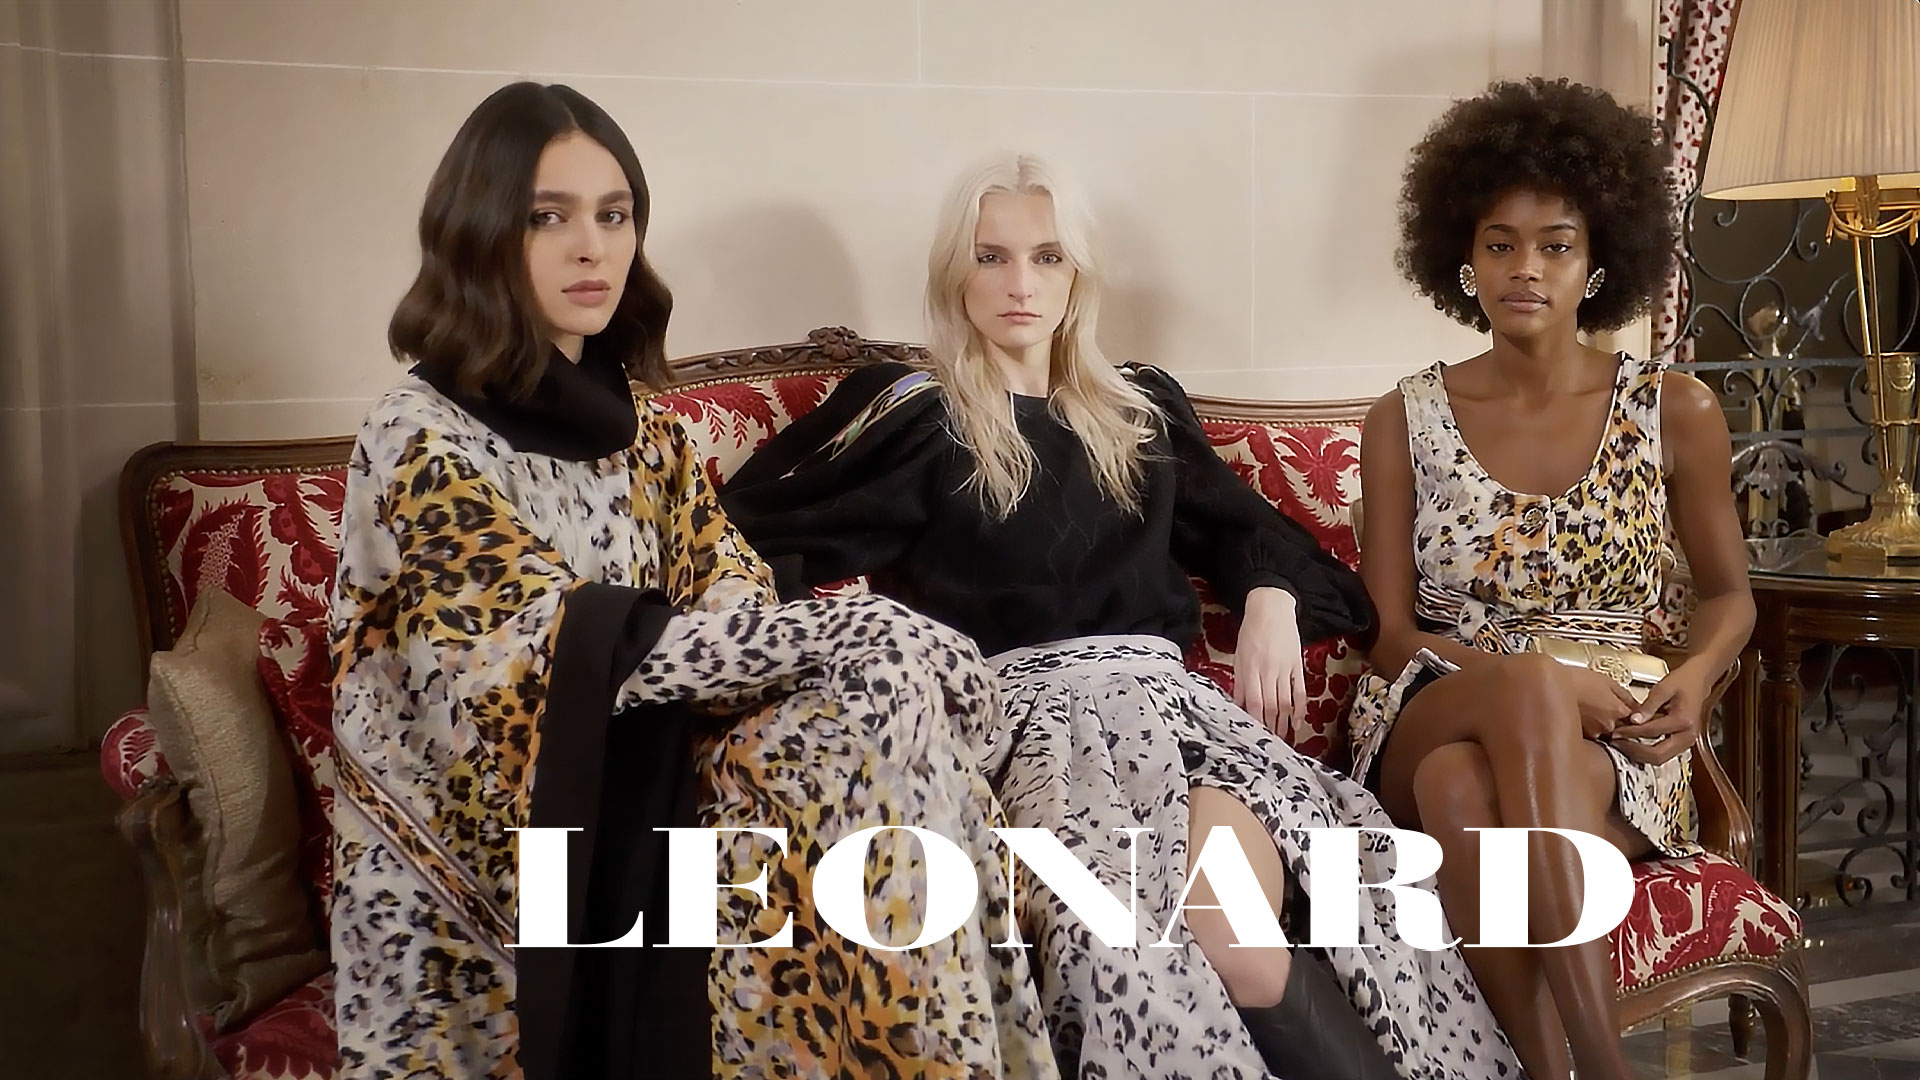 FALL-WINTER 2022/2023 LEONARD PARIS READY-TO-WEAR COLLECTION